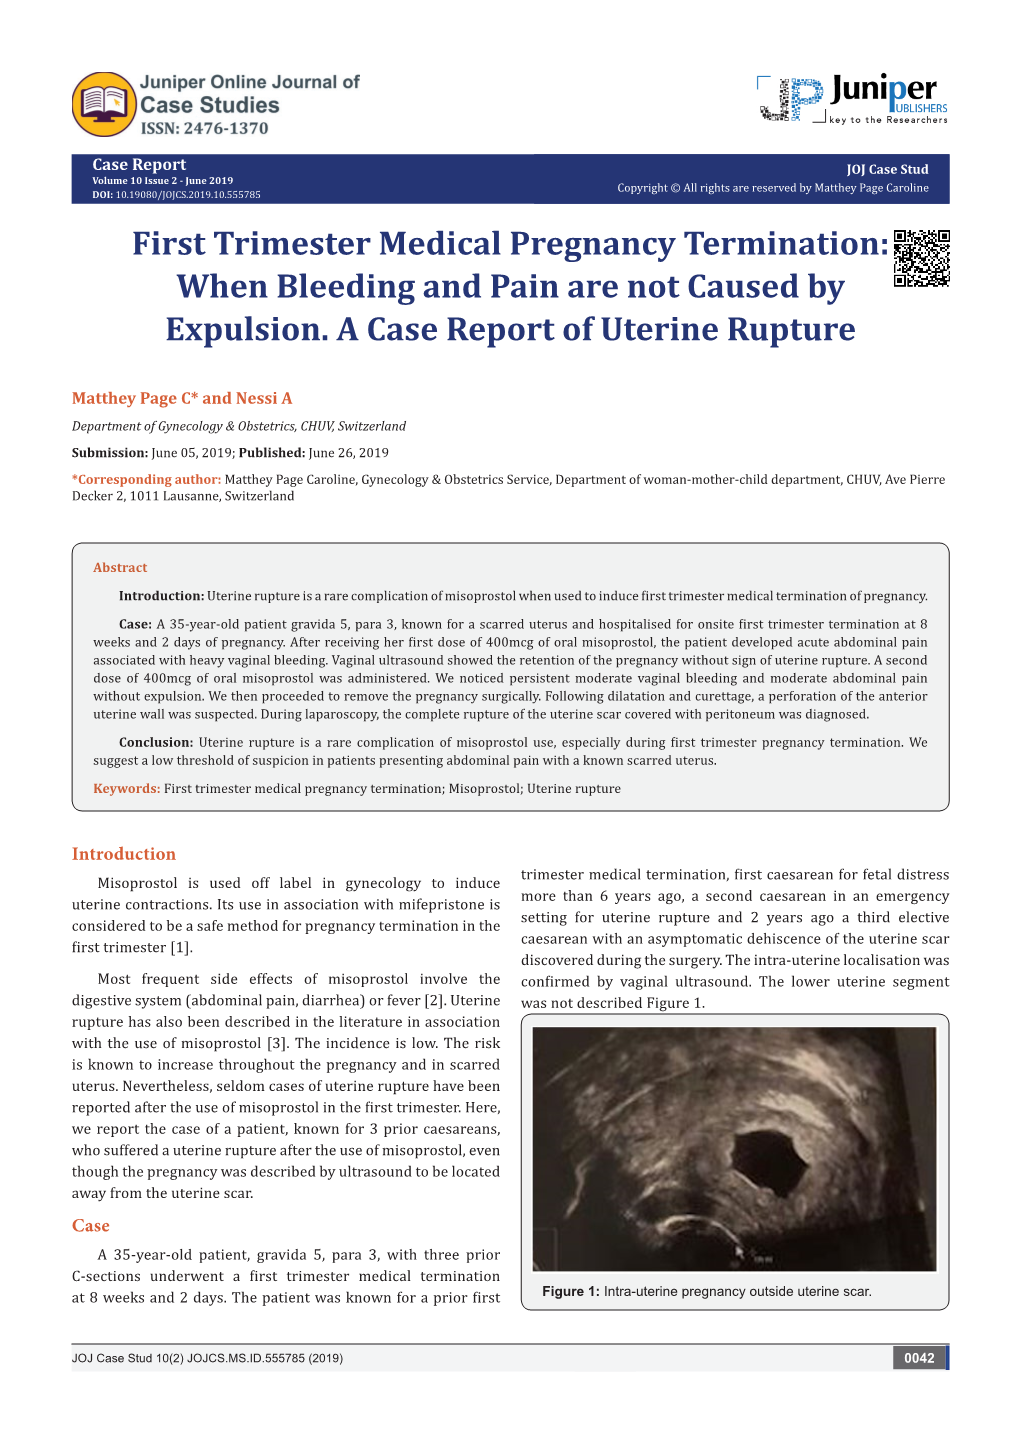 First Trimester Medical Pregnancy Termination: When Bleeding and Pain Are Not Caused by Expulsion